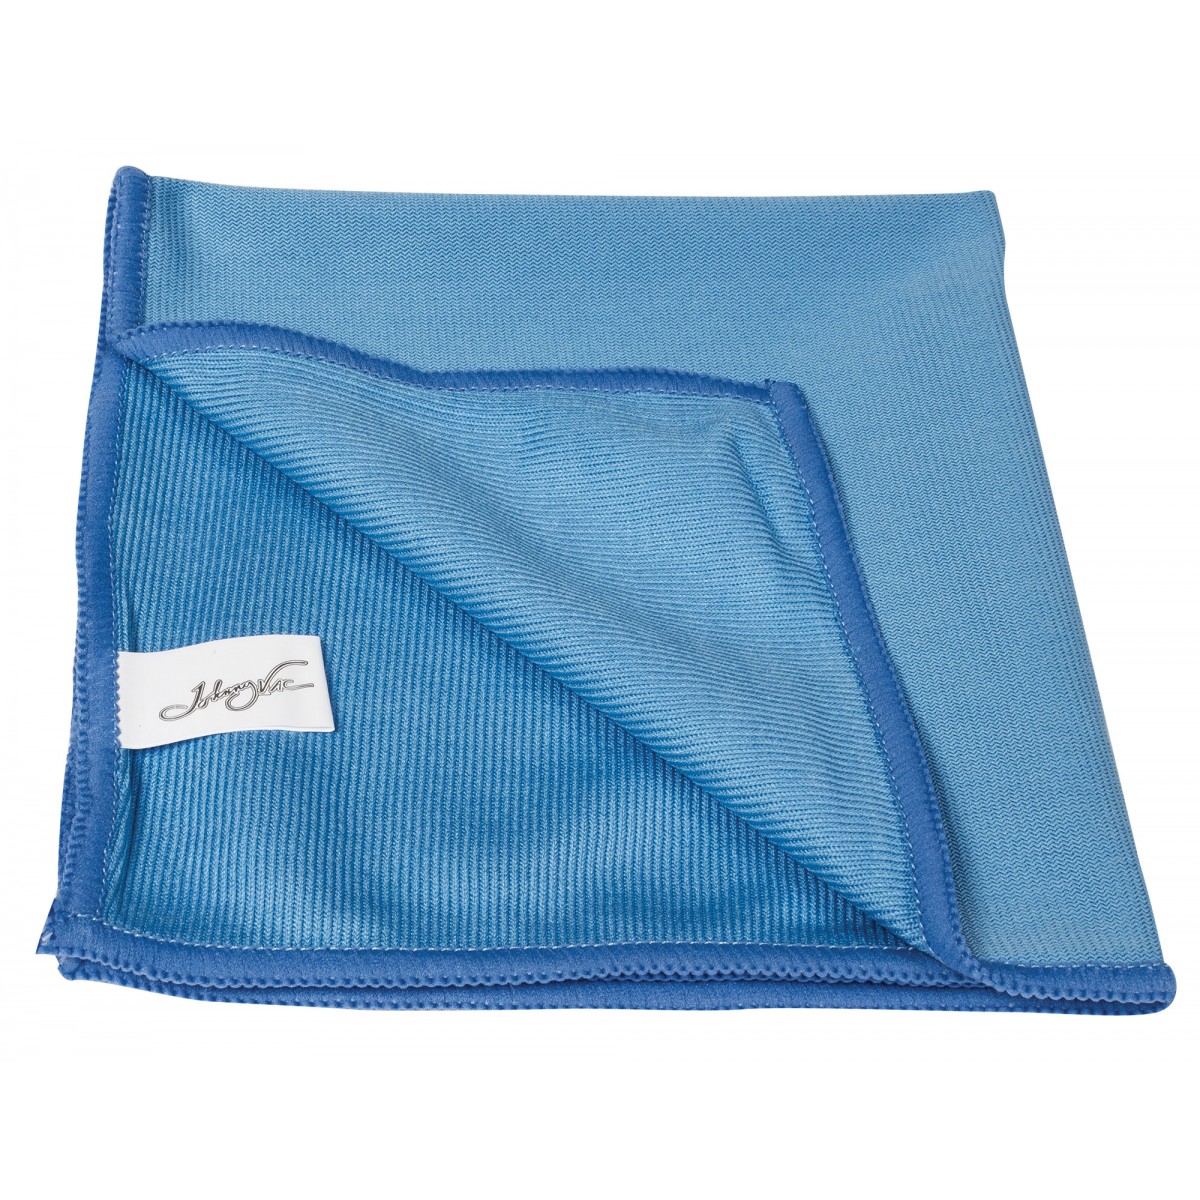 Microfiber Cloth For Window Cleaning 14 X 14 Blue Color